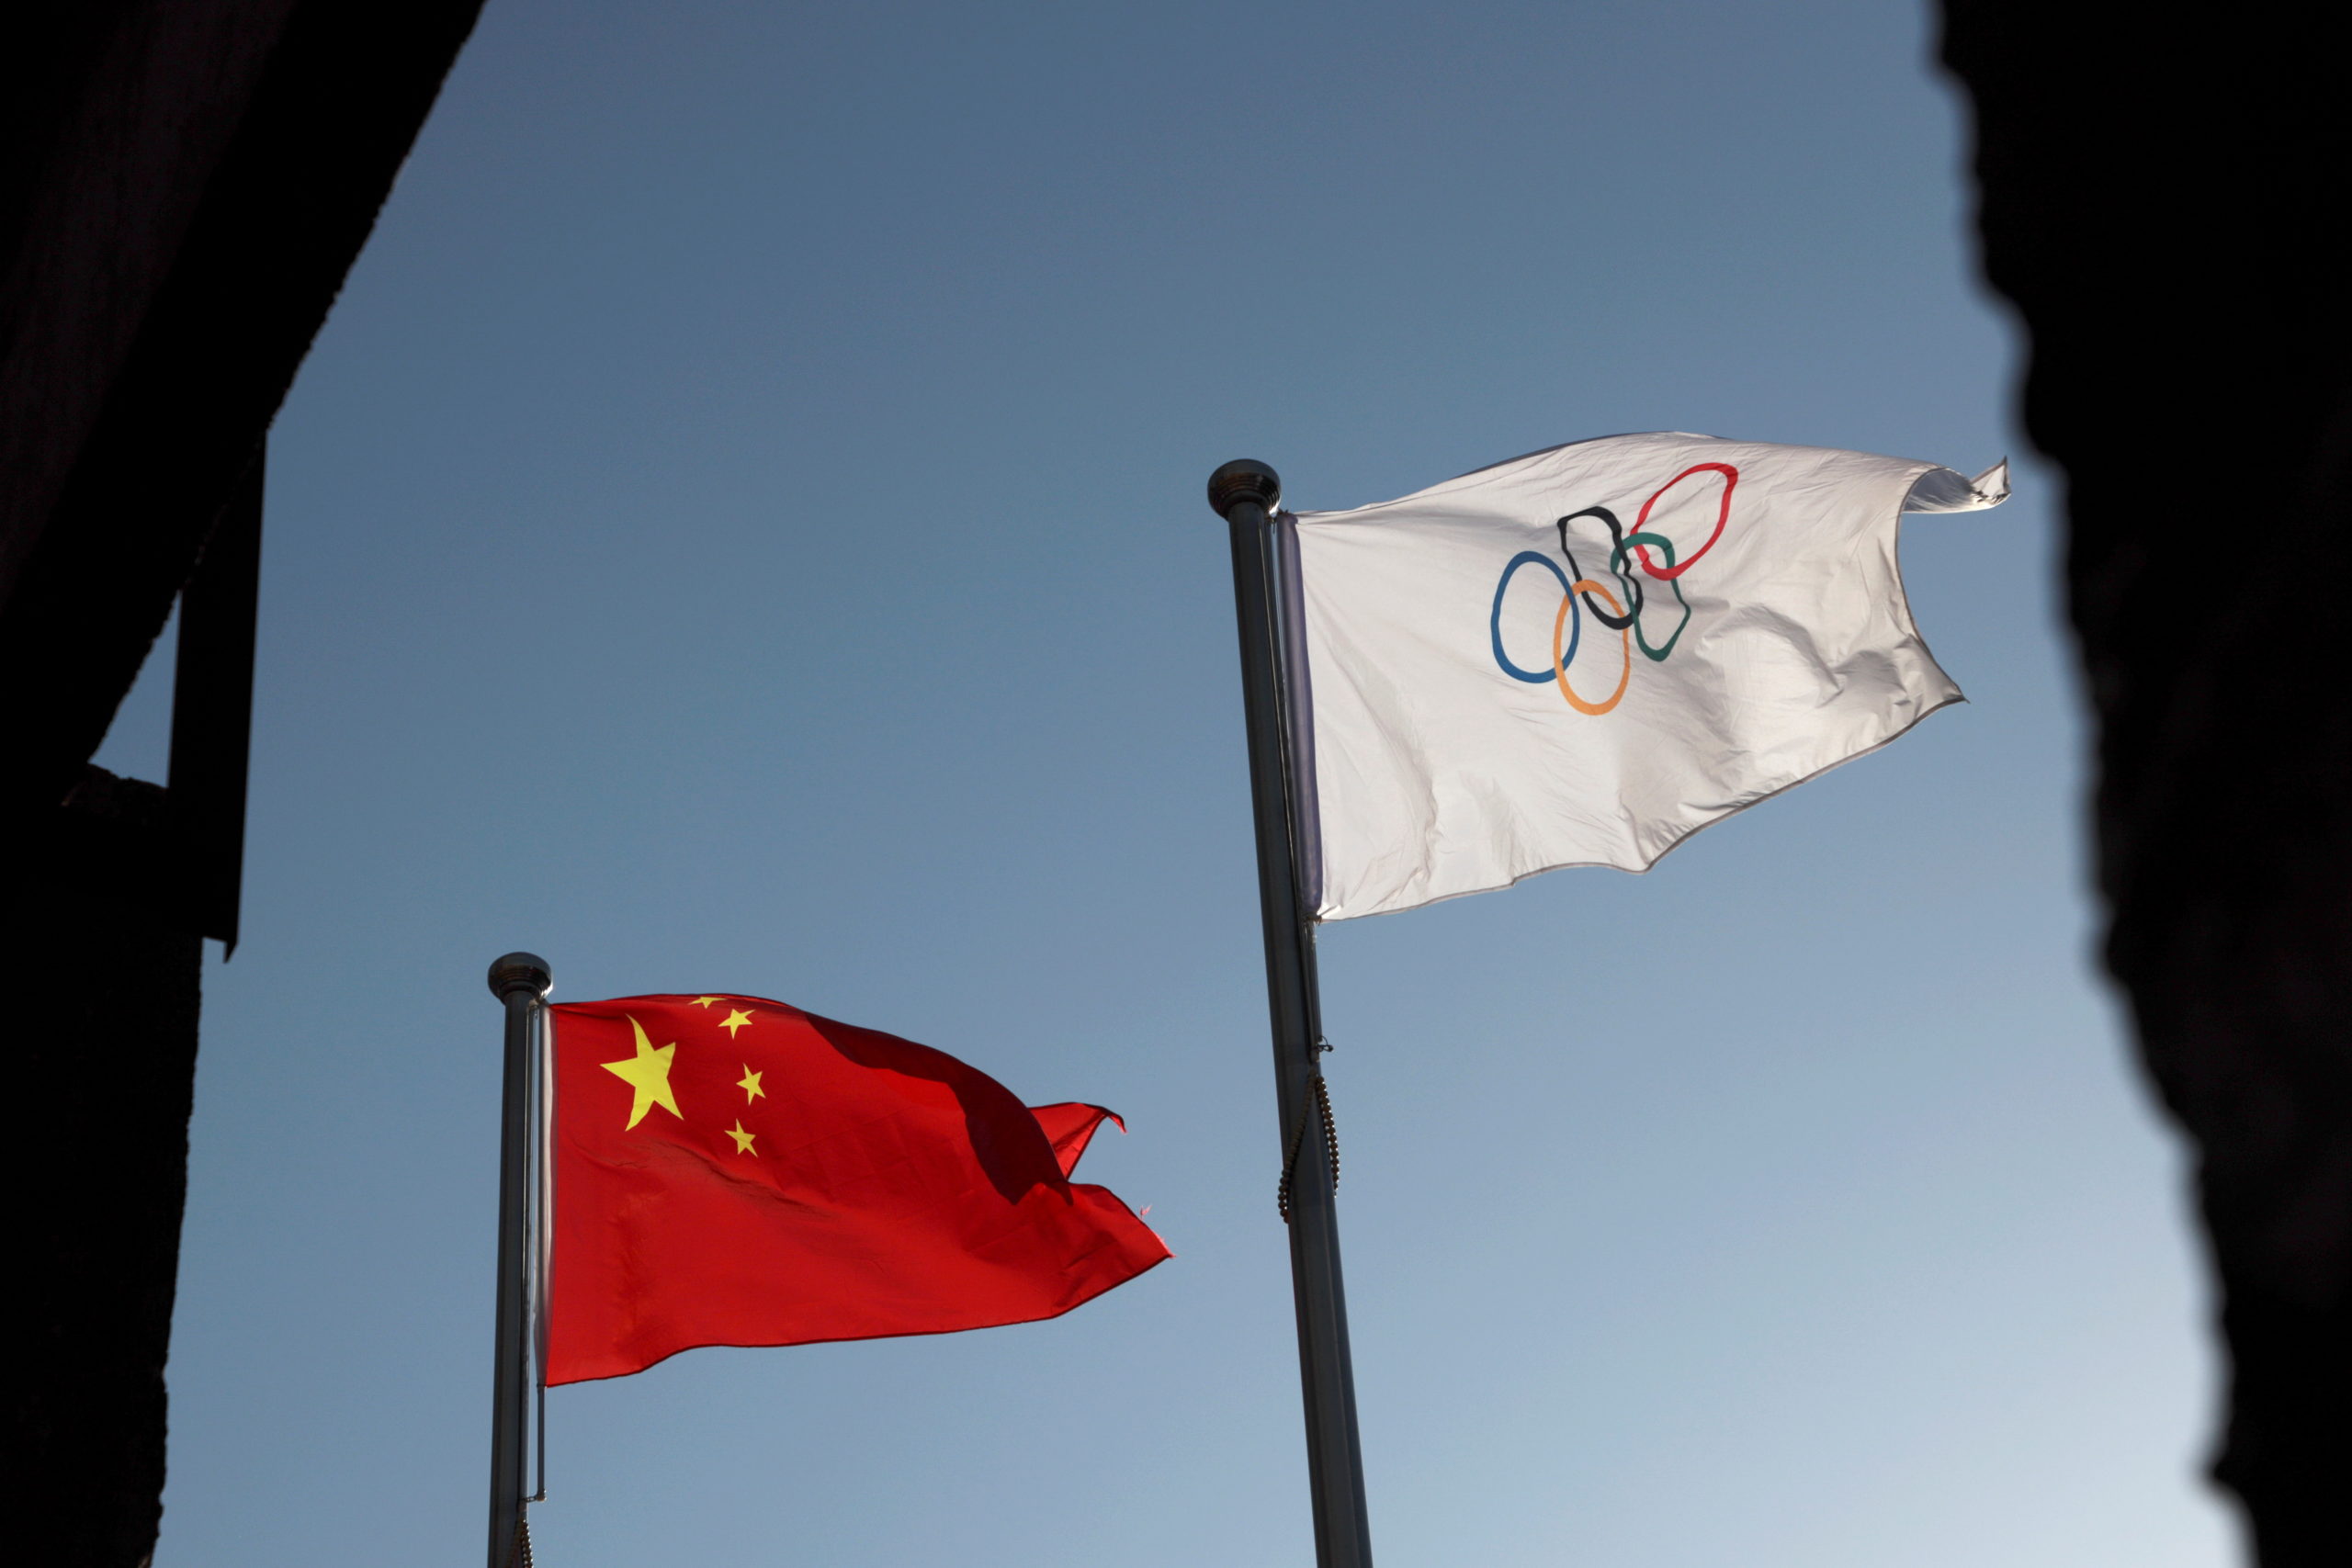 FILE PHOTO: The Chinese and Olympic flags flutter at the headquarters of the Beijing Organising Committee for the 2022 Olympic and Paralympic Winter Games in Beijing, China November 12, 2021.